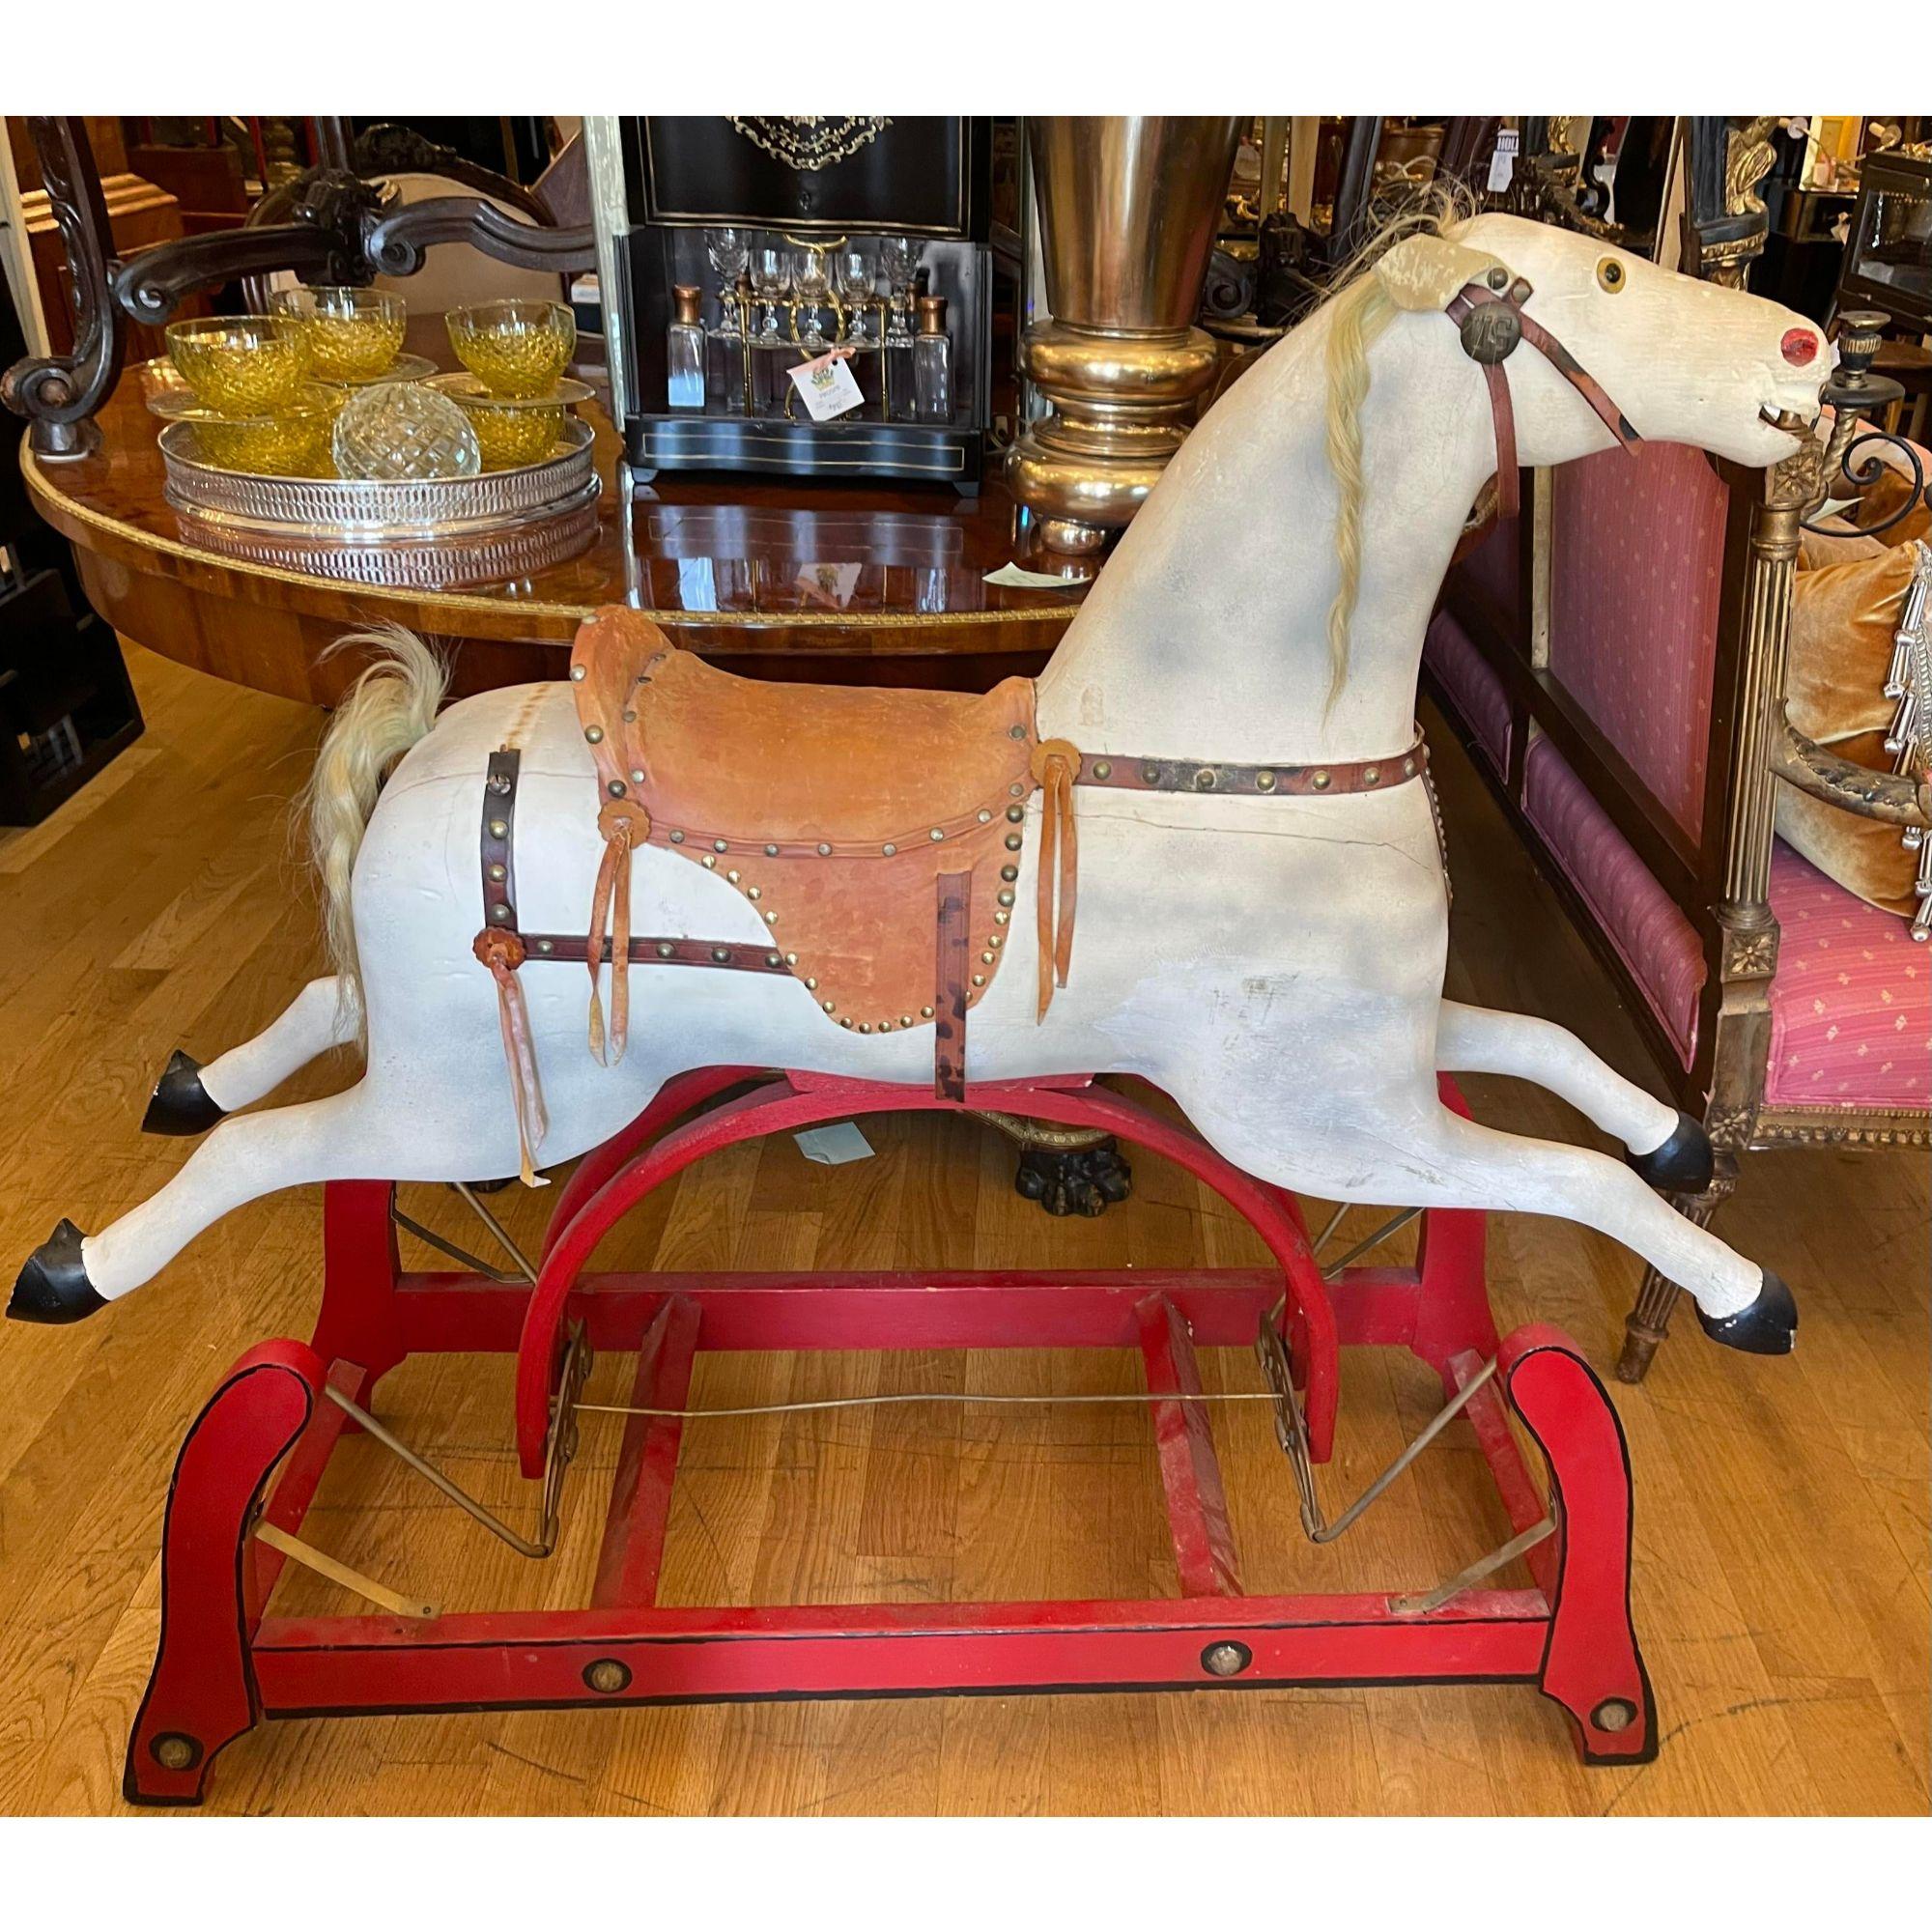 Antique American primitive handmade gliding rocking hobby horse

Additional information: 
Materials: Iron, Leather, Wood
Color: Antique White
Period: 19th Century
Styles: American
Item Type: Vintage, Antique or Pre-owned
Dimensions: 44.5